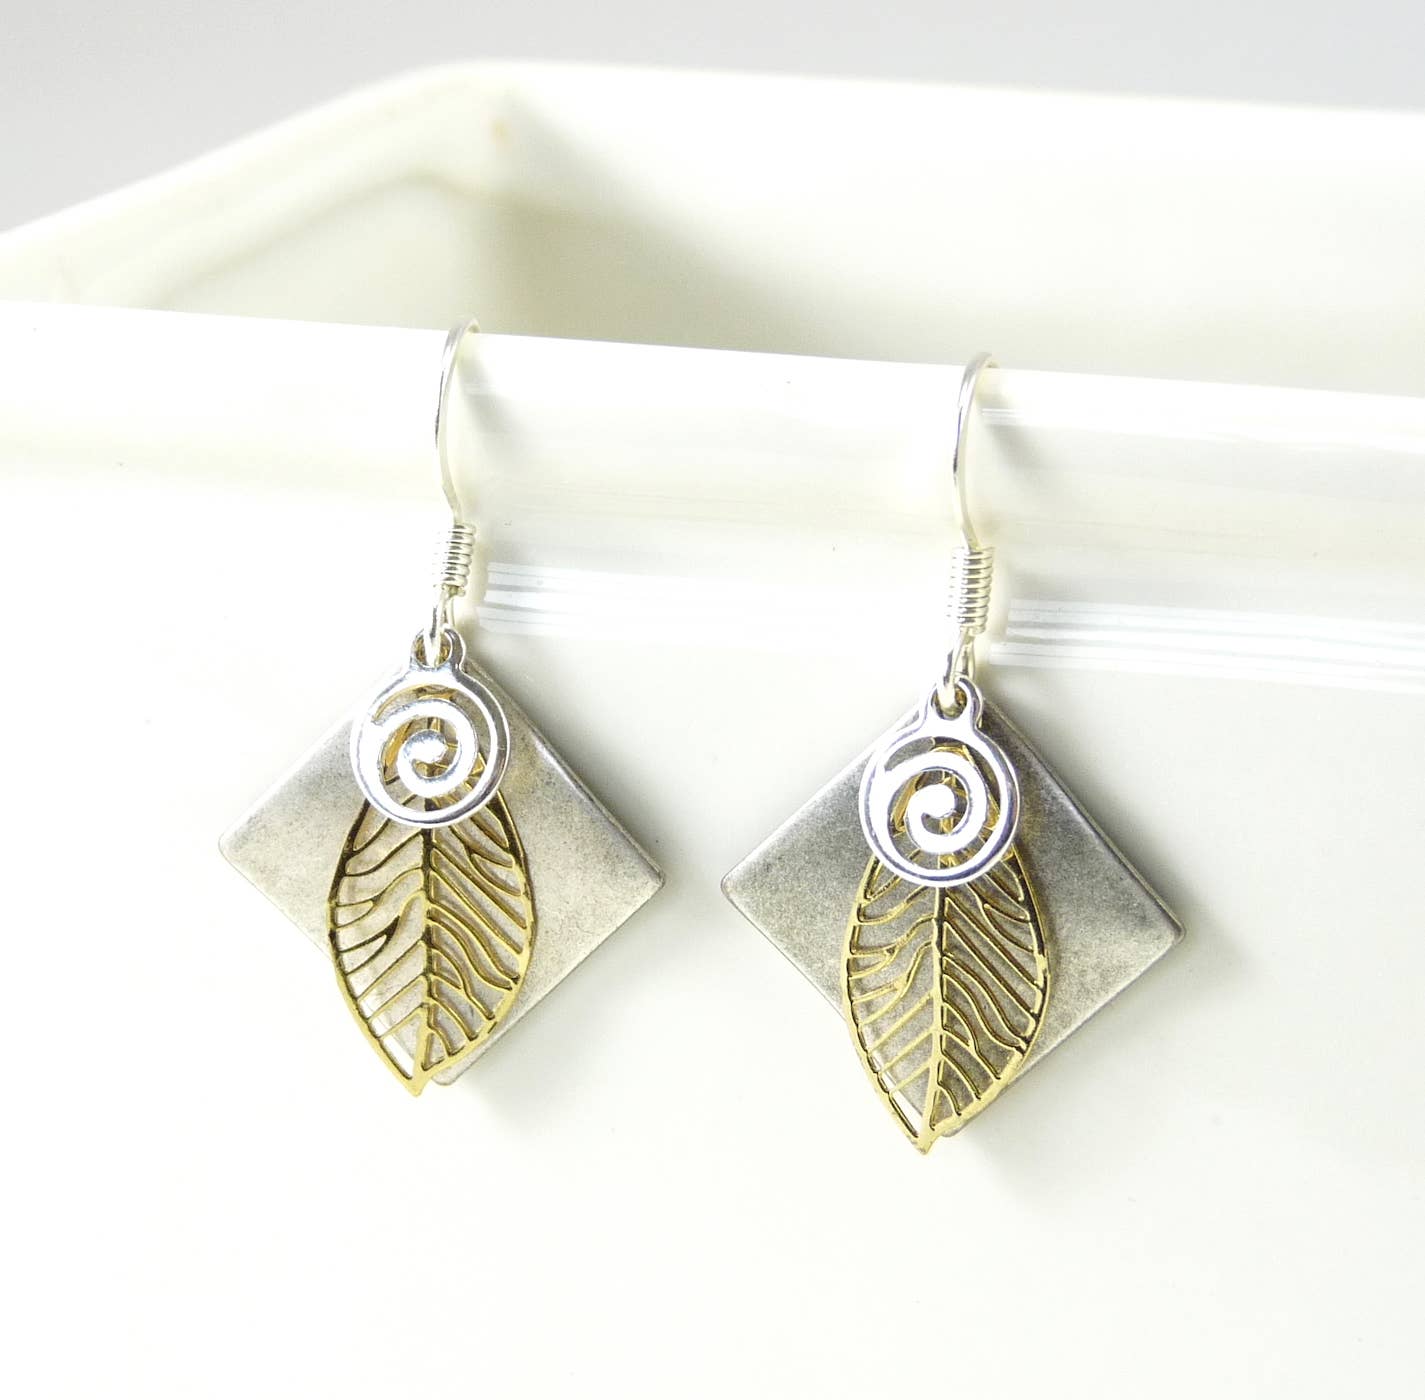 Metal Earrings Gold Leaf - 7 Choices